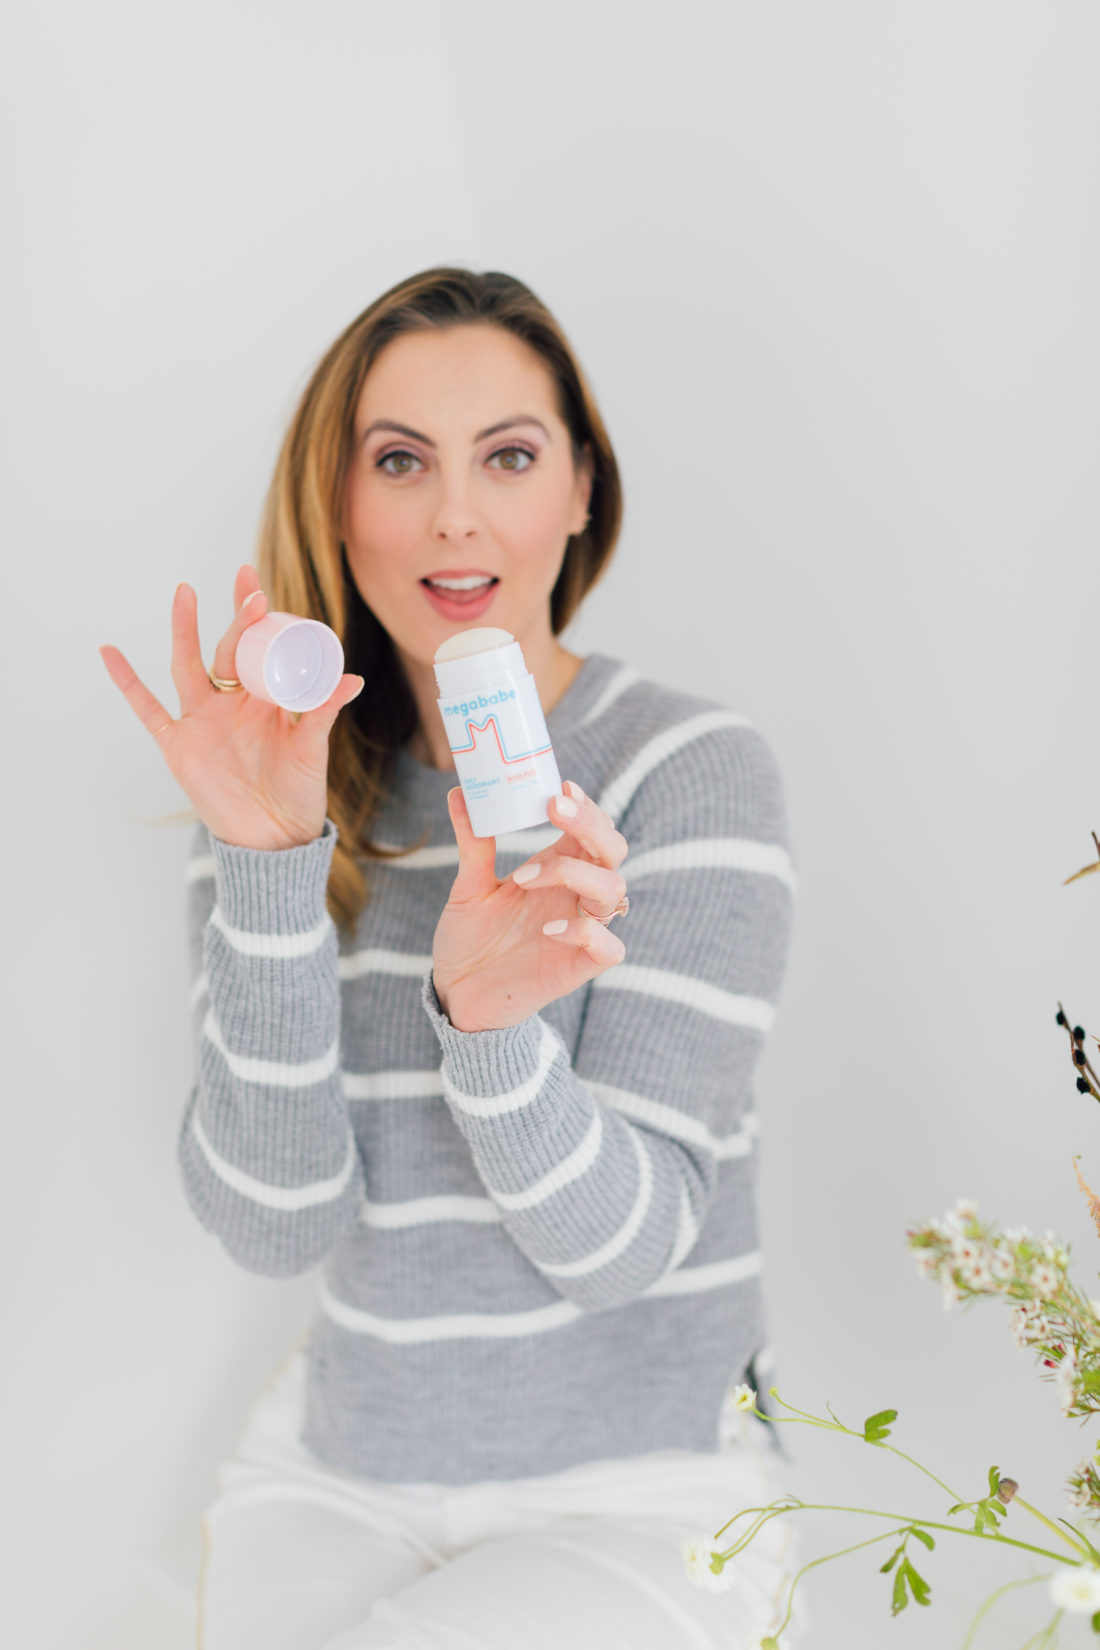 Eva Amurri Martino wears a grey and white striped sweater, and removes the cap on a tube of Megababe deodorant